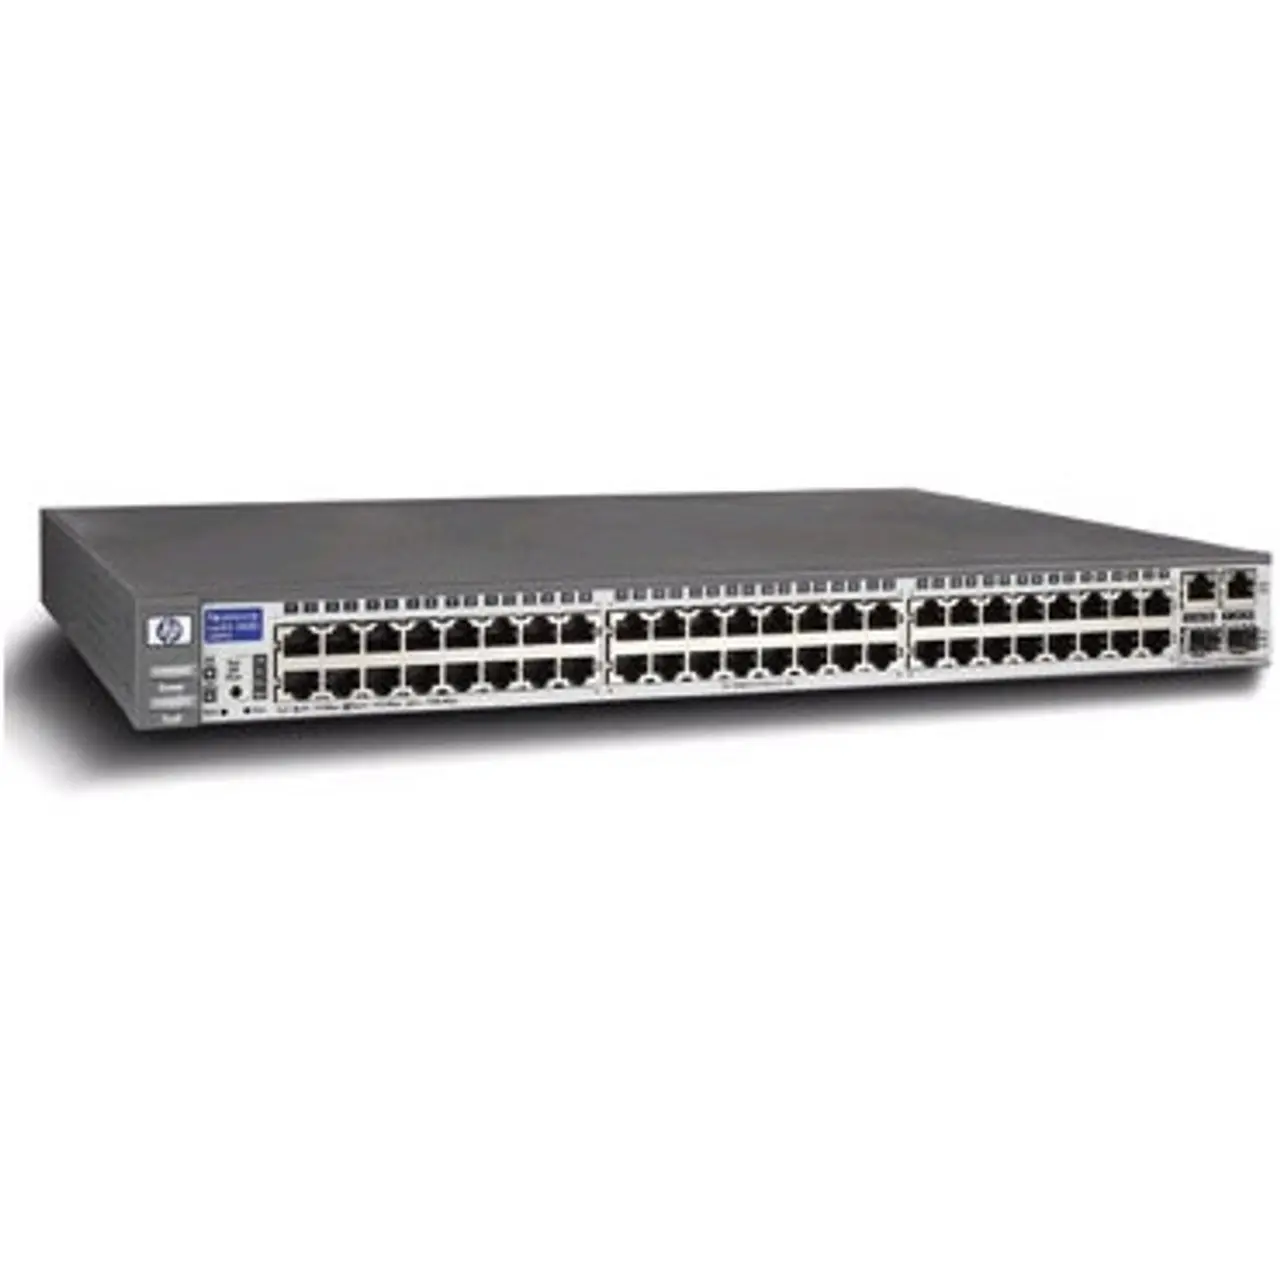 hewlett packard network switches - What are the types of switches in networking